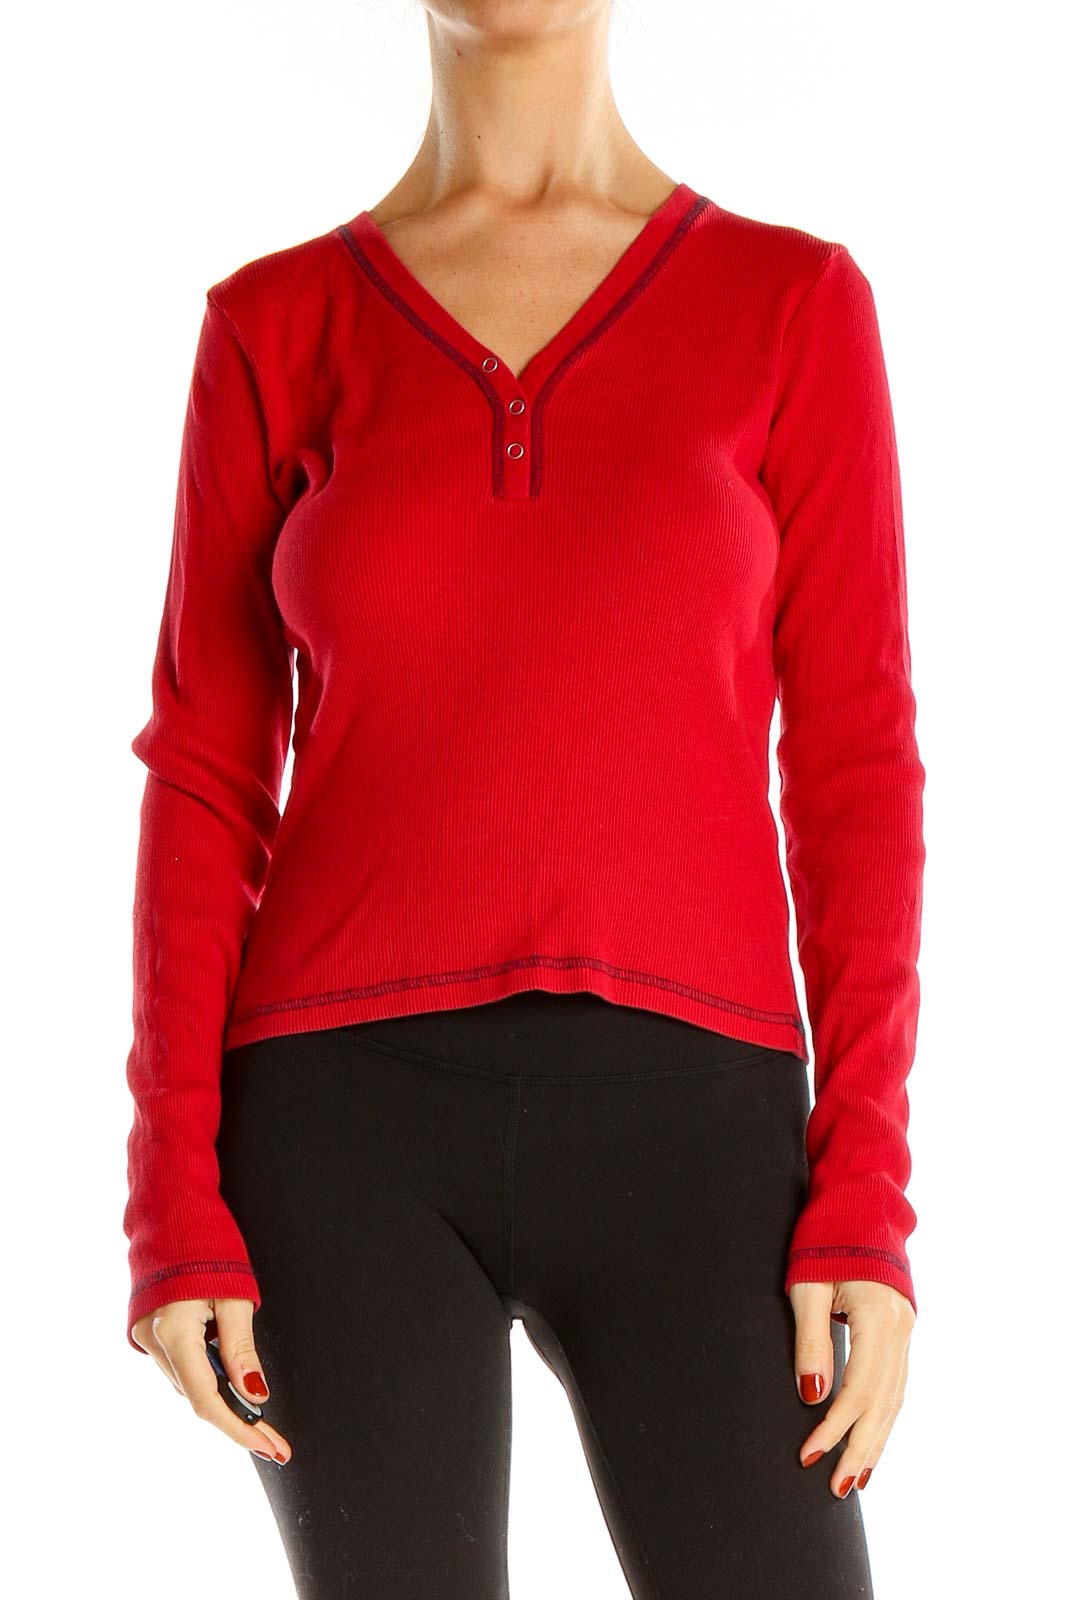 Red Contrast Stitch Casual Top Front